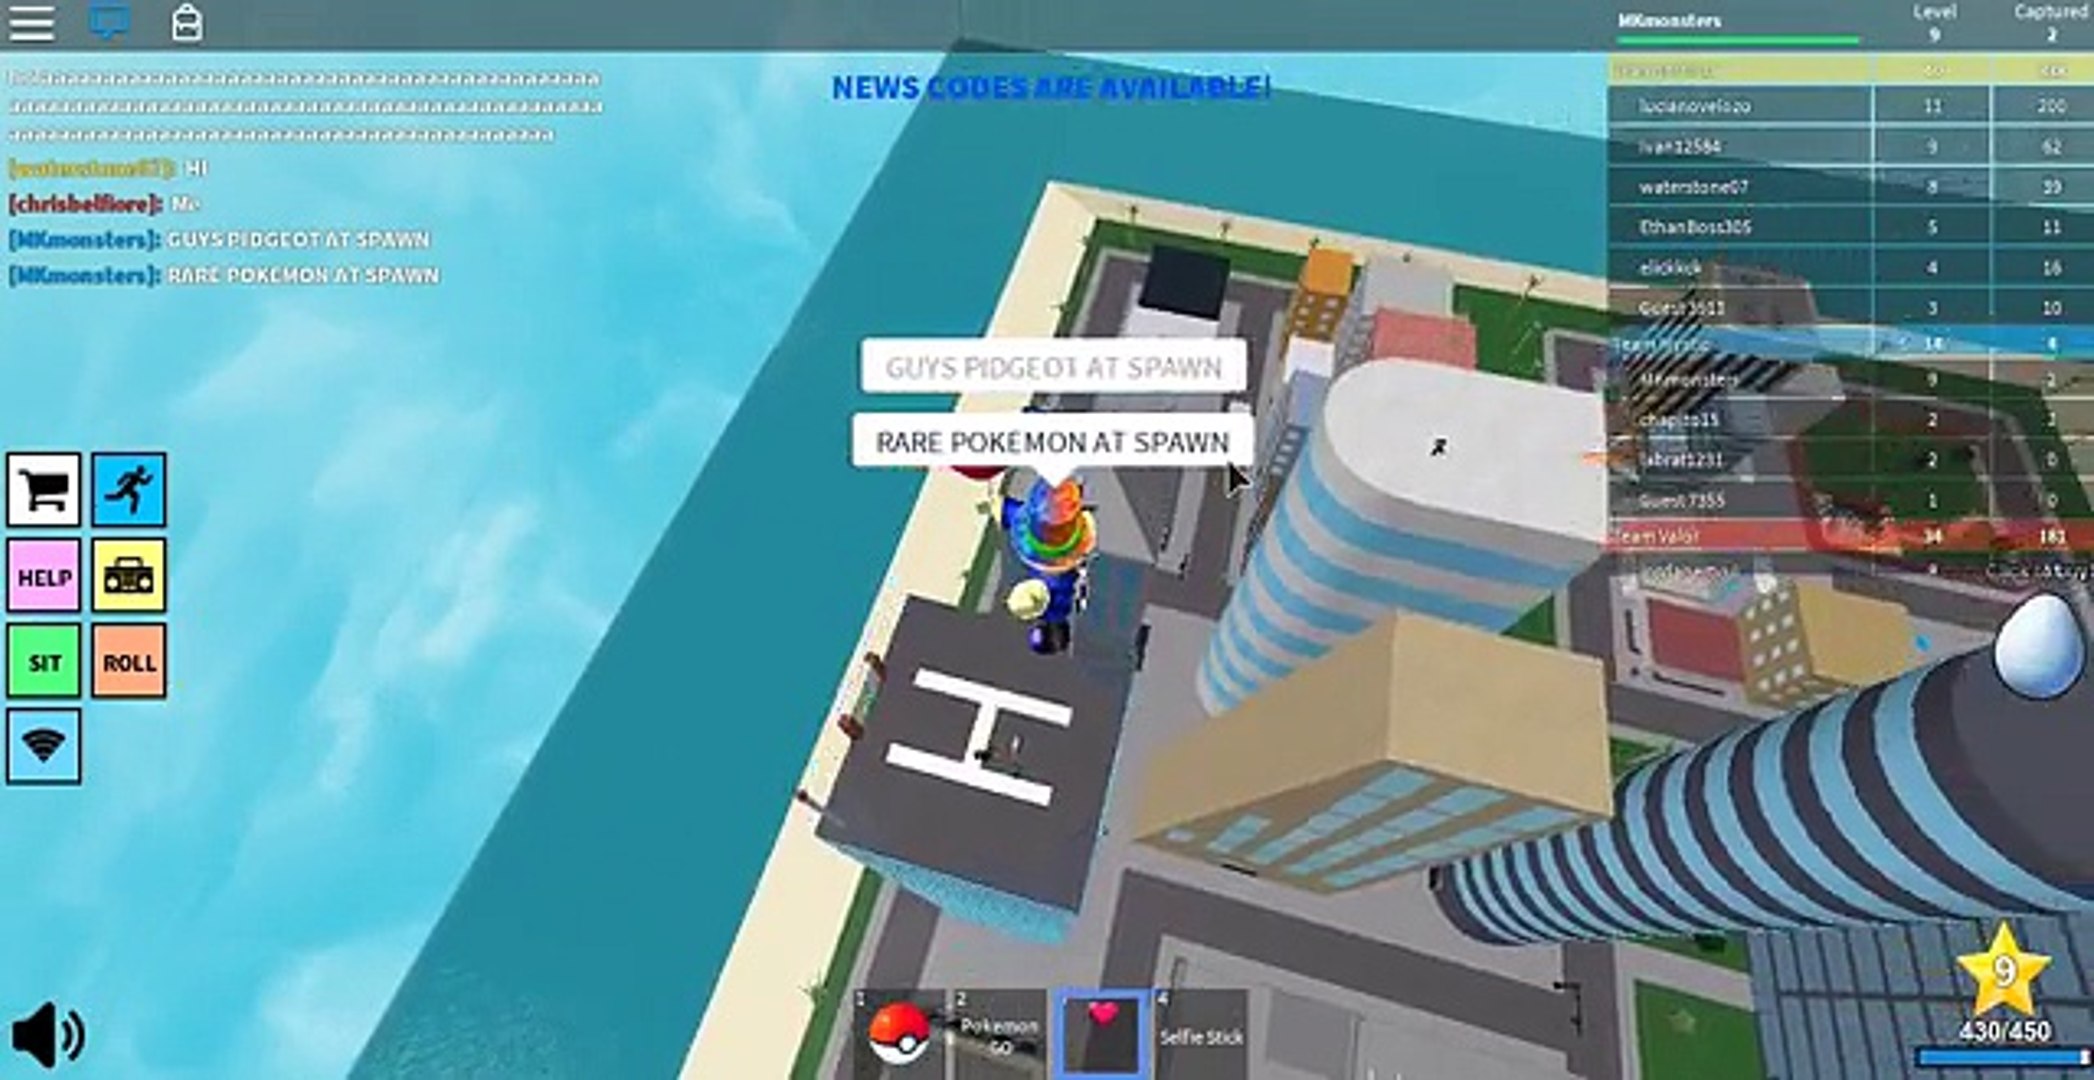 Roblox Pokemon Go Spawning Mewtwo 1200 Robux Spent Video Dailymotion - pokemon go roblox twitter code for spawning mewtwo